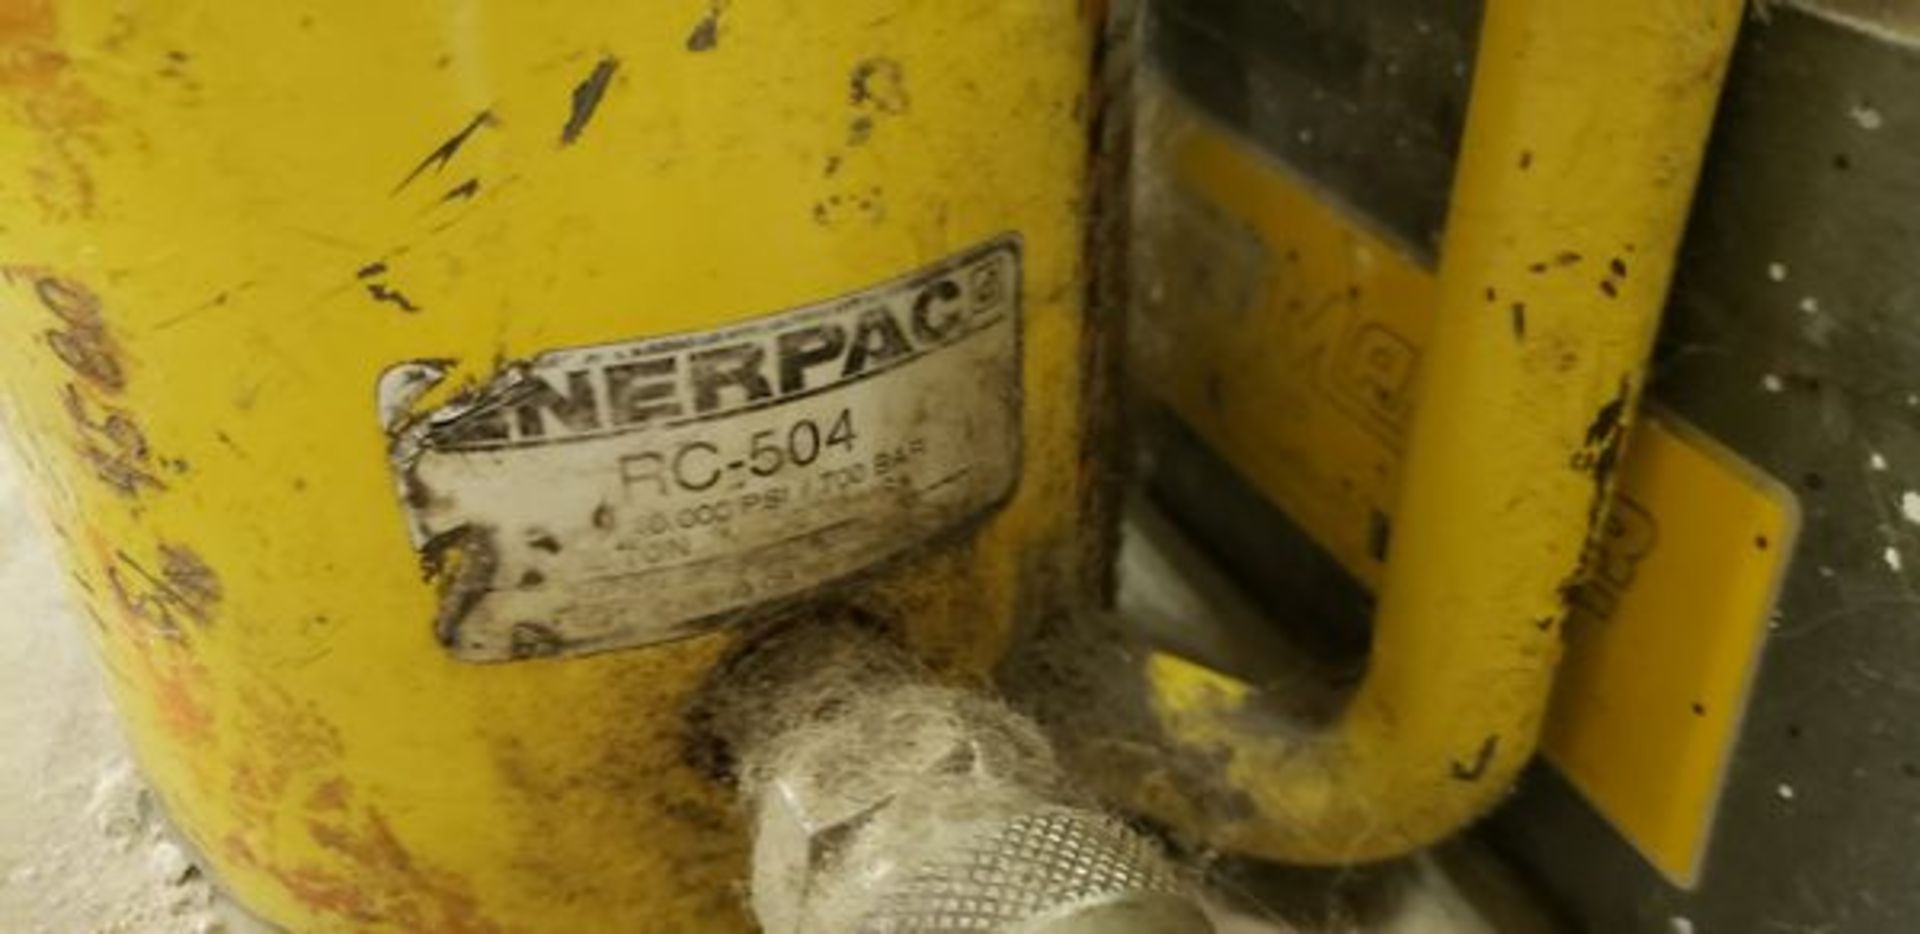 ENERPAC RC504 10,000LB PSI PNEUMATIC HYDRAULIC JACK - Image 2 of 2